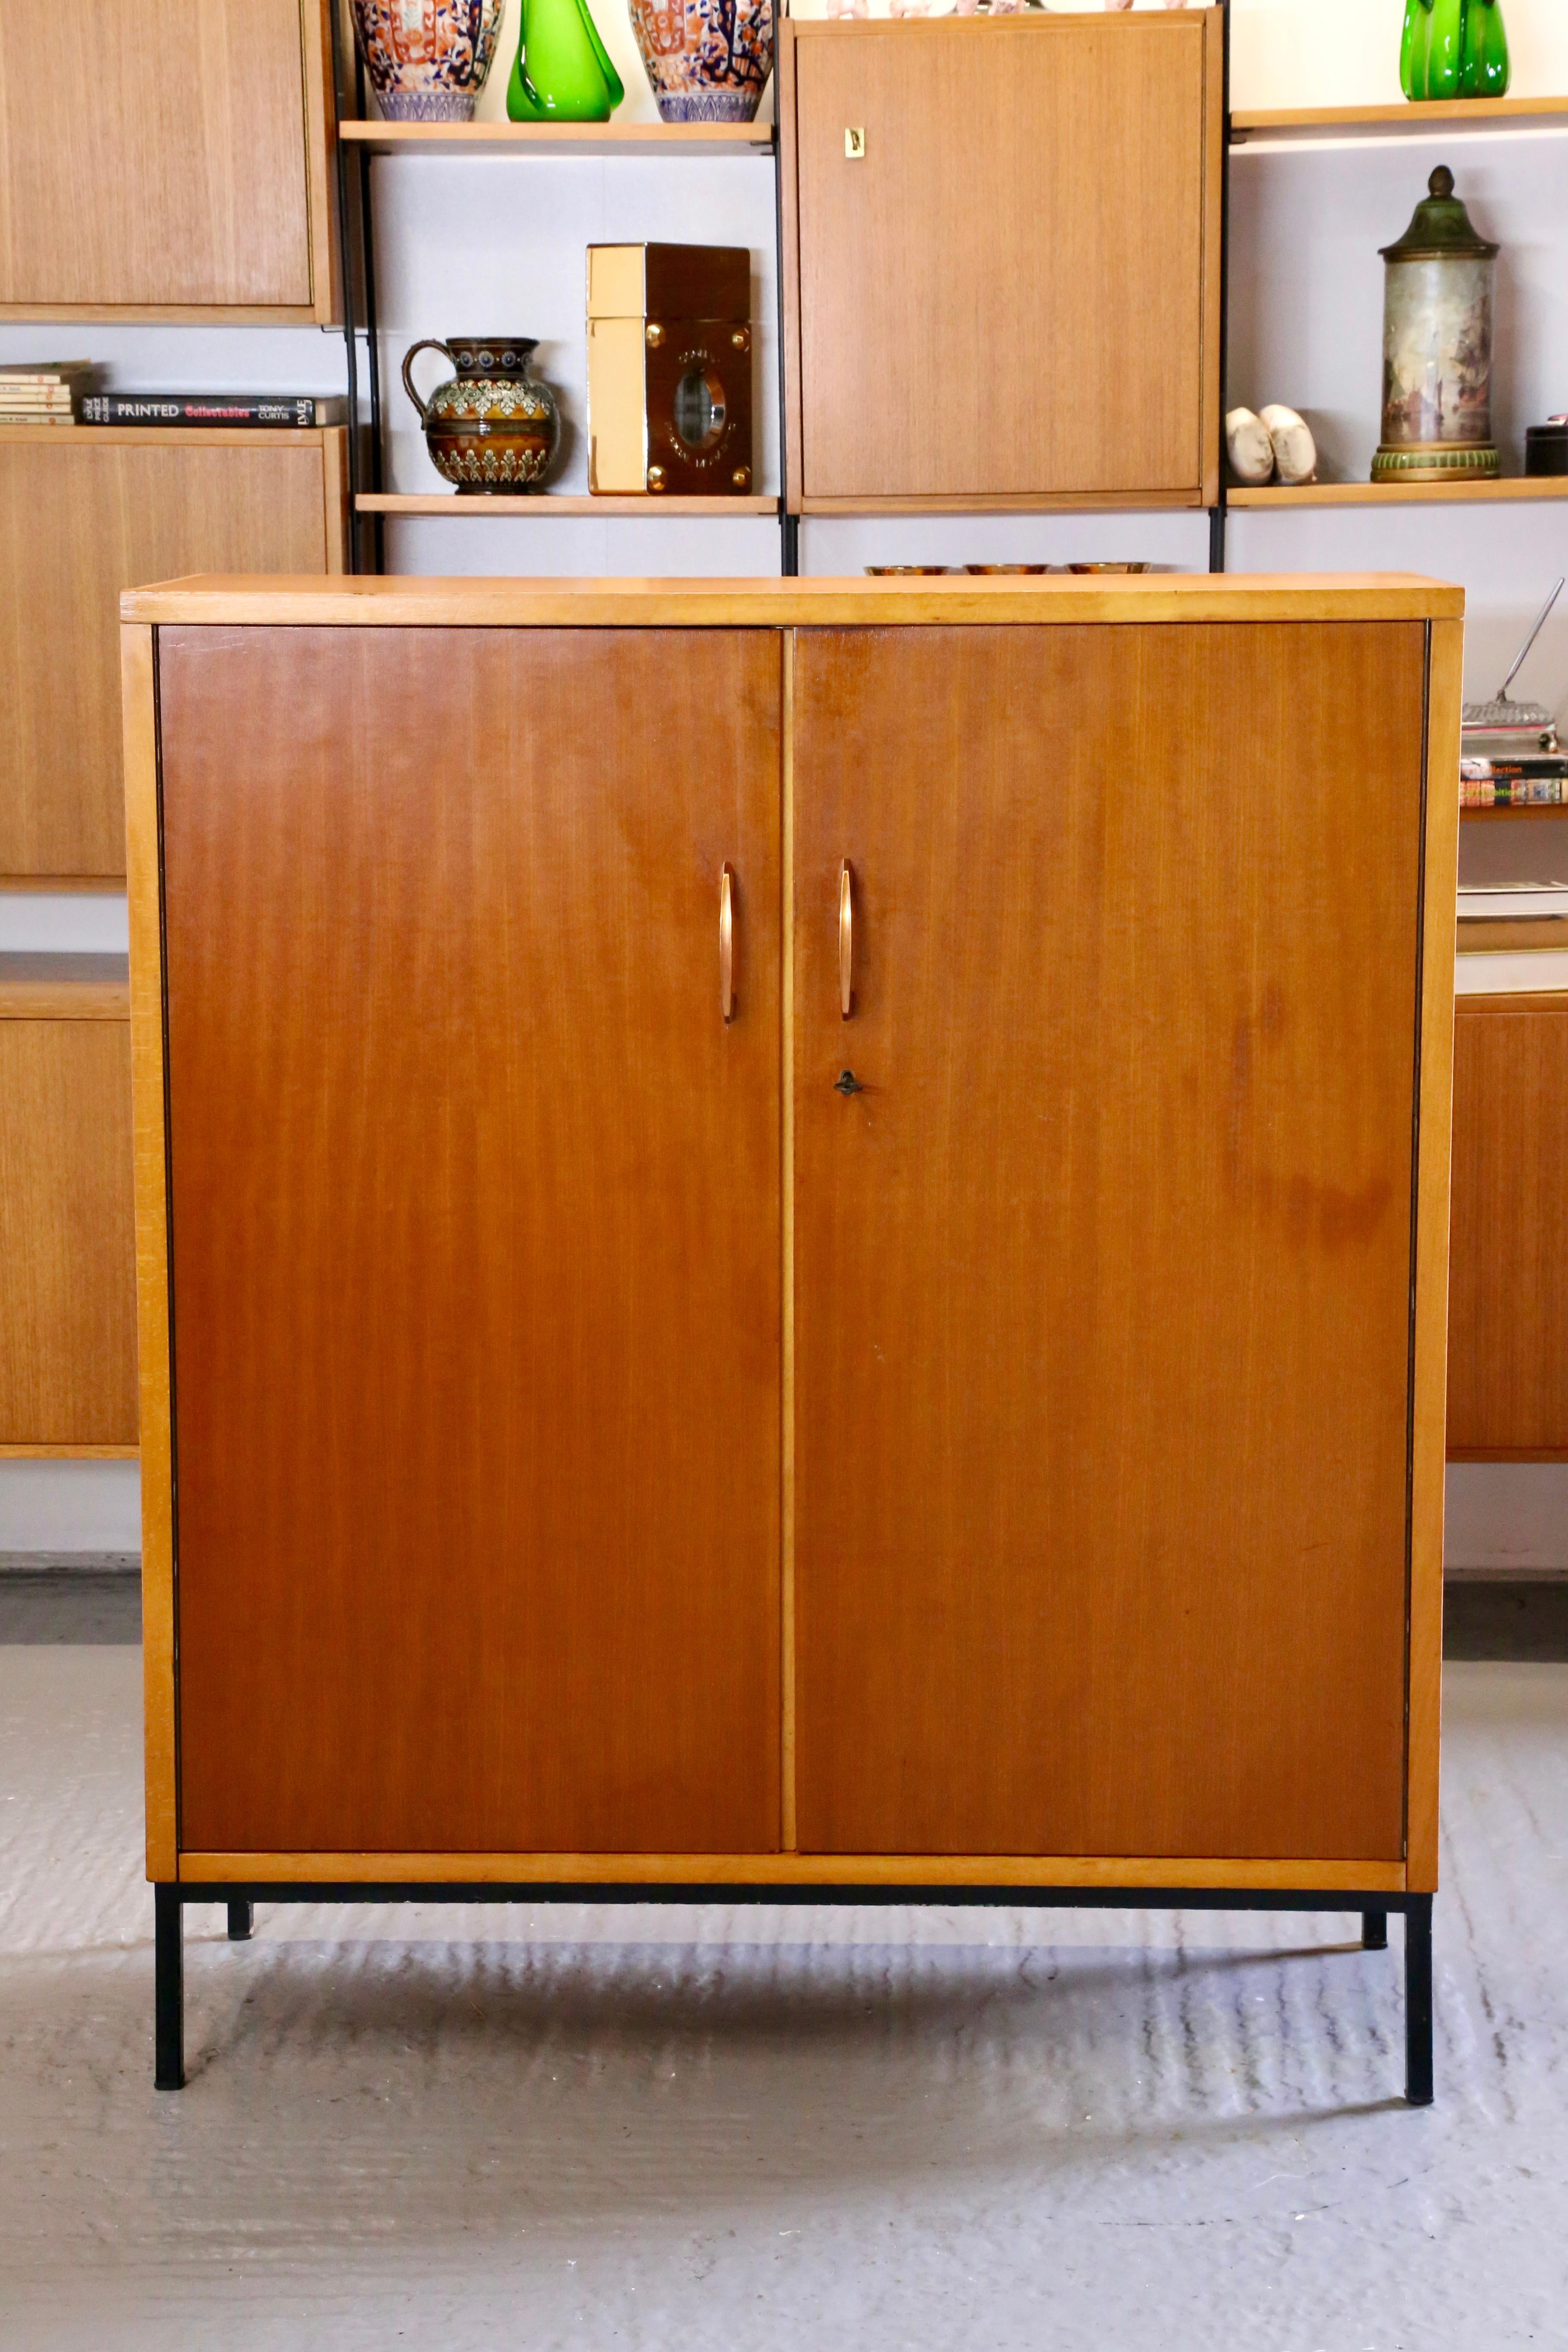 Sophisticated Simplicity: Mid-Century Modern Italian Walnut & Maple Cupboard On Stand by Dal Vera

Elevate your space with the timeless elegance of the Mid-Century Modern Italian Walnut & Maple Cupboard On Stand crafted by the esteemed designer Dal